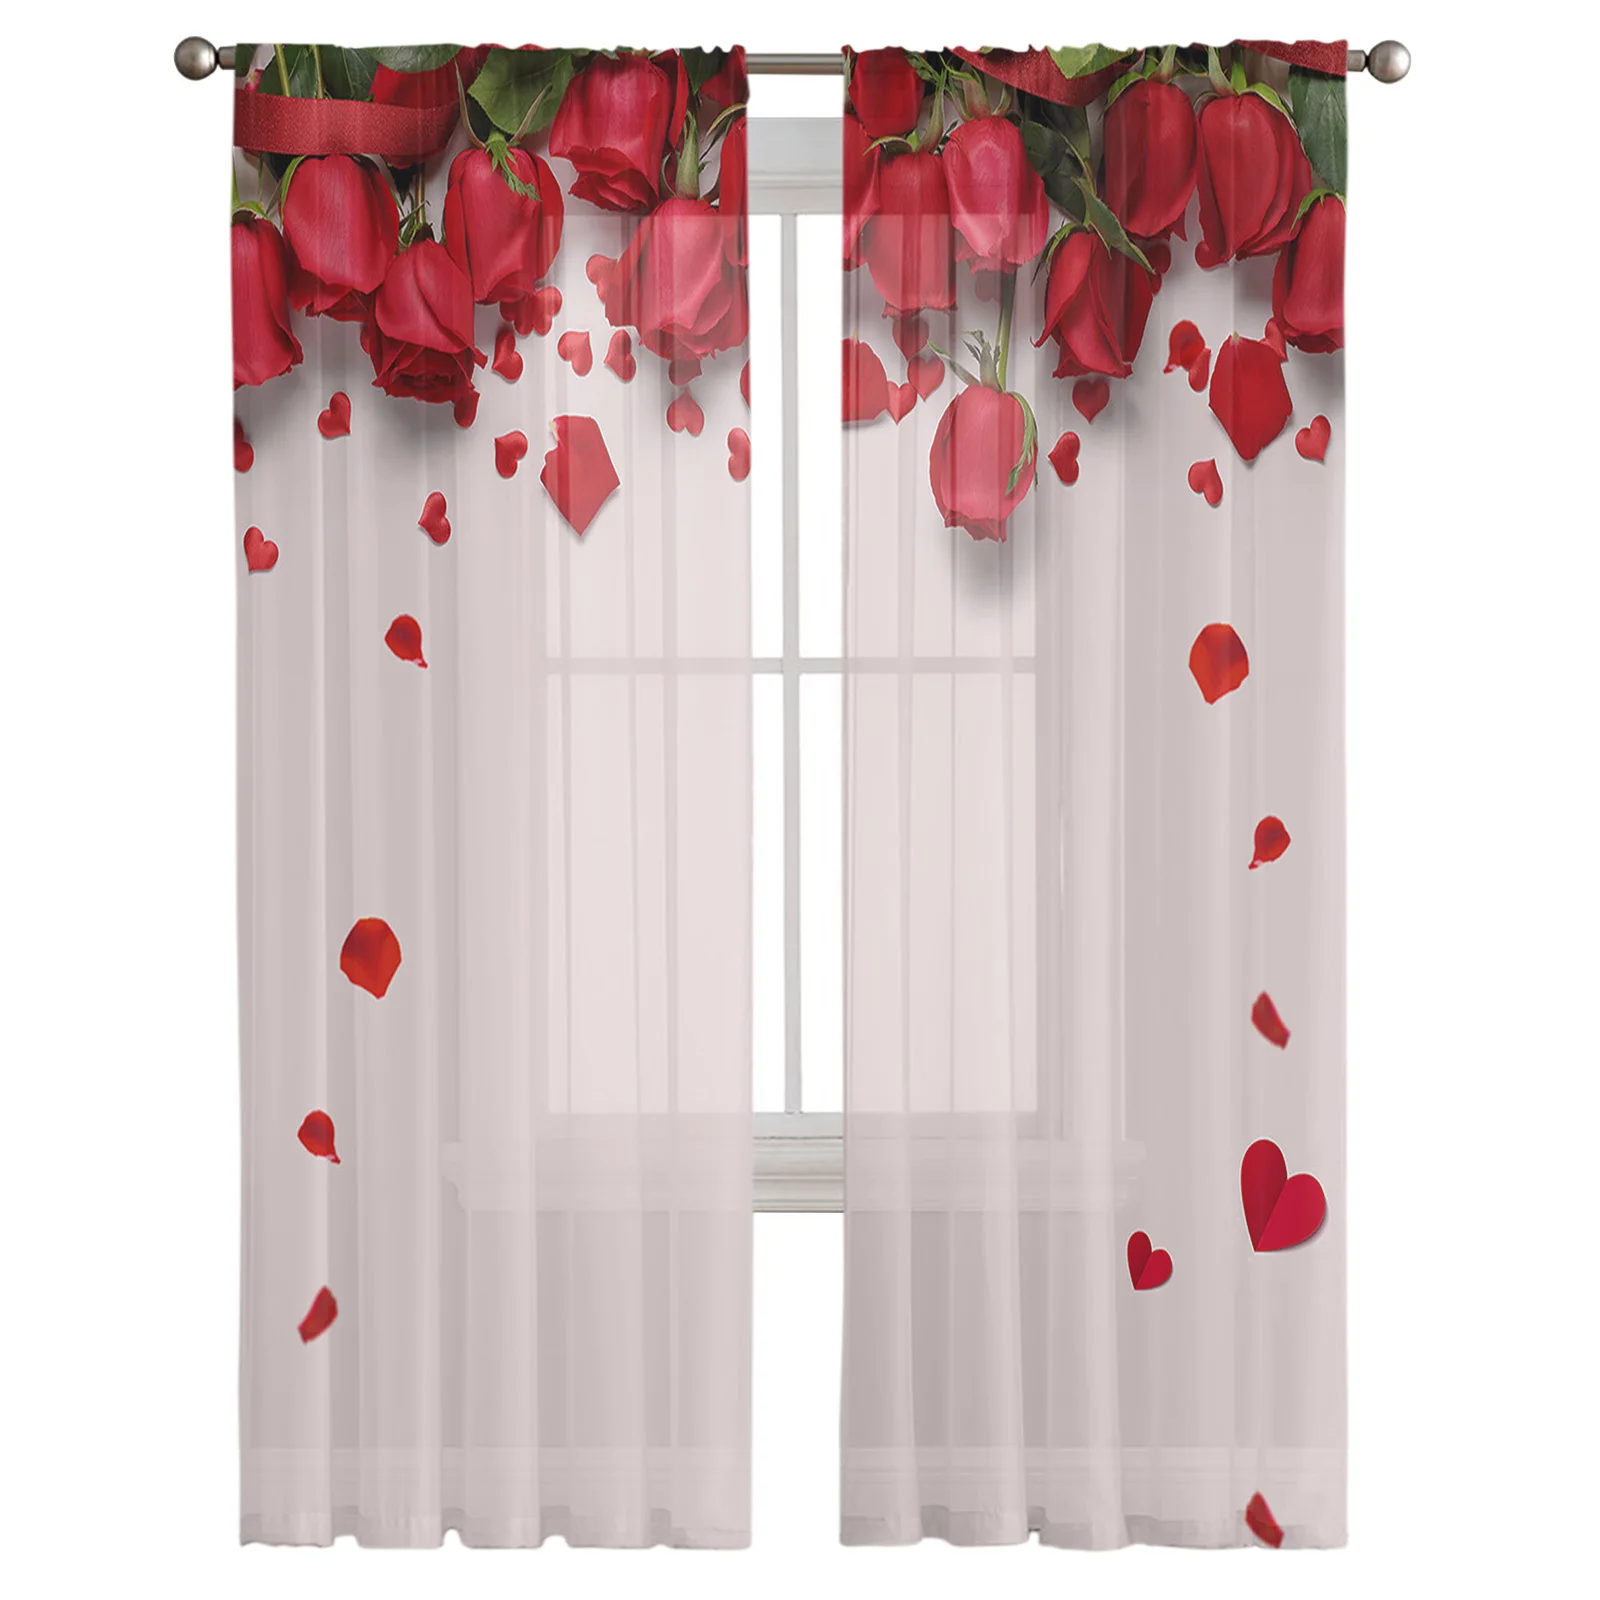 Red Rose Flower Chiffon Sheer Curtains for Living Room Bedroom Home Decoration Window Voile Tulle Curtain Drapes